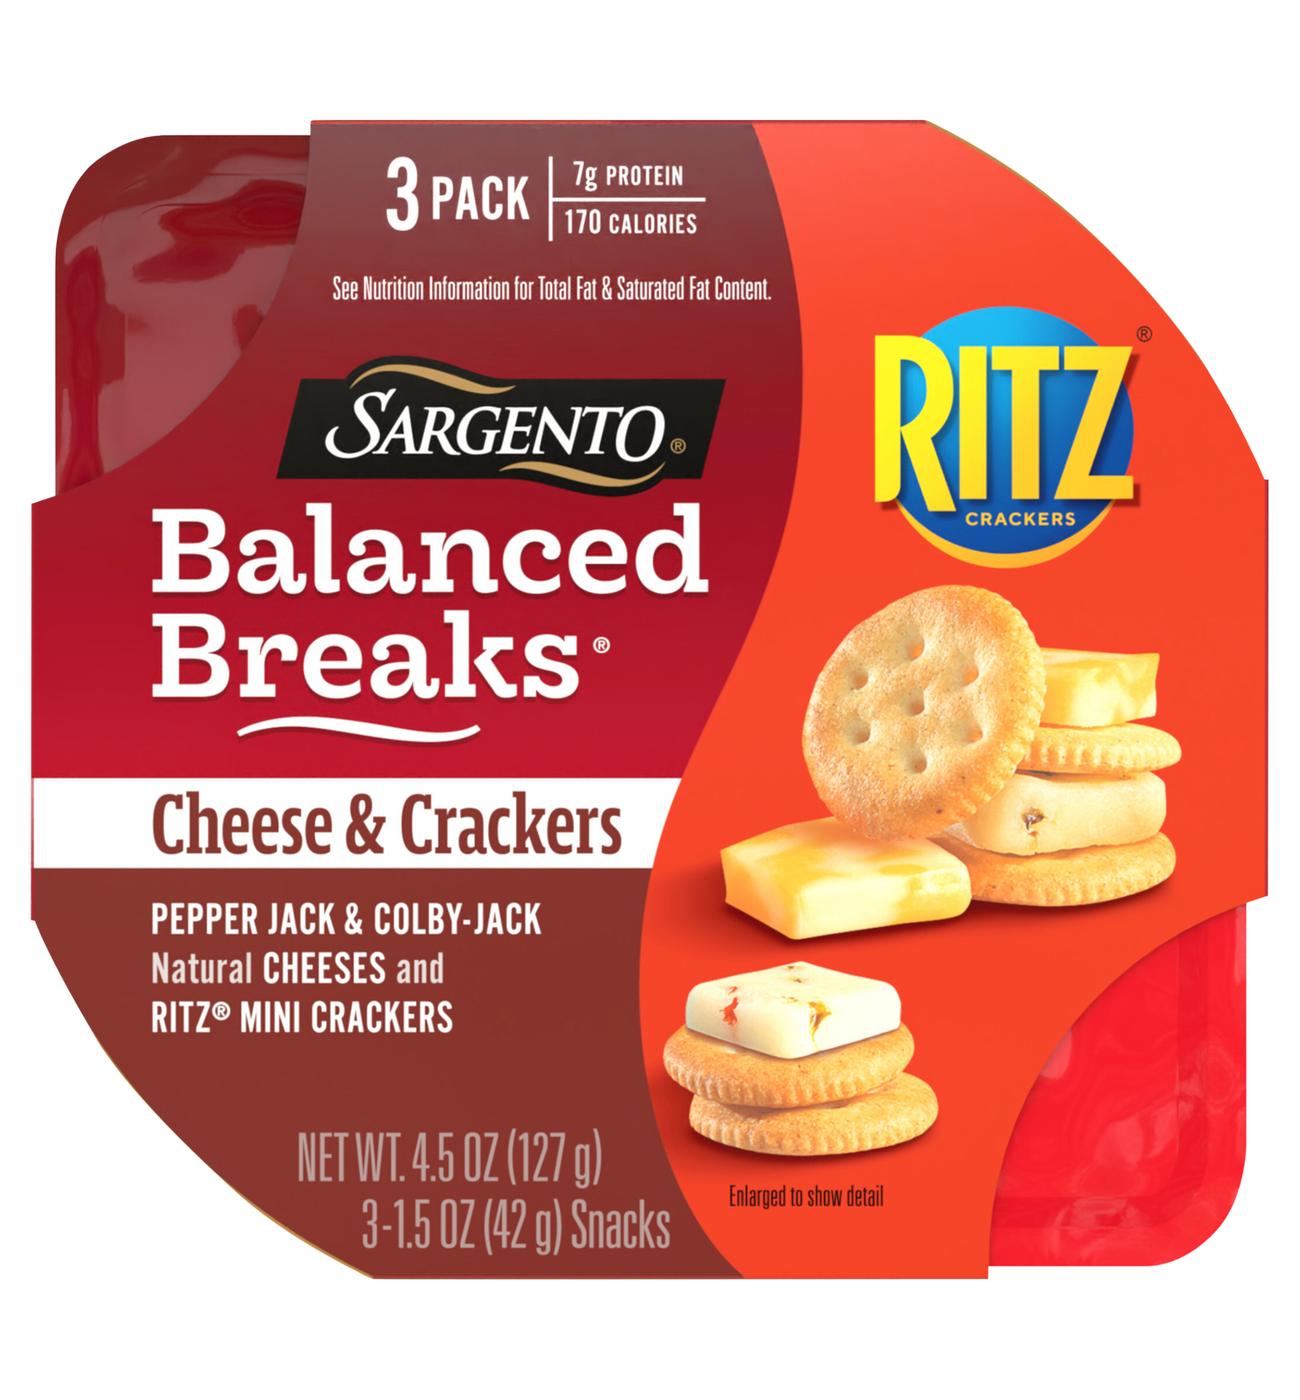 SARGENTO Balanced Breaks Snack Trays - Pepper Jack & Colby Jack Cheese with Ritz Mini Crackers; image 1 of 2